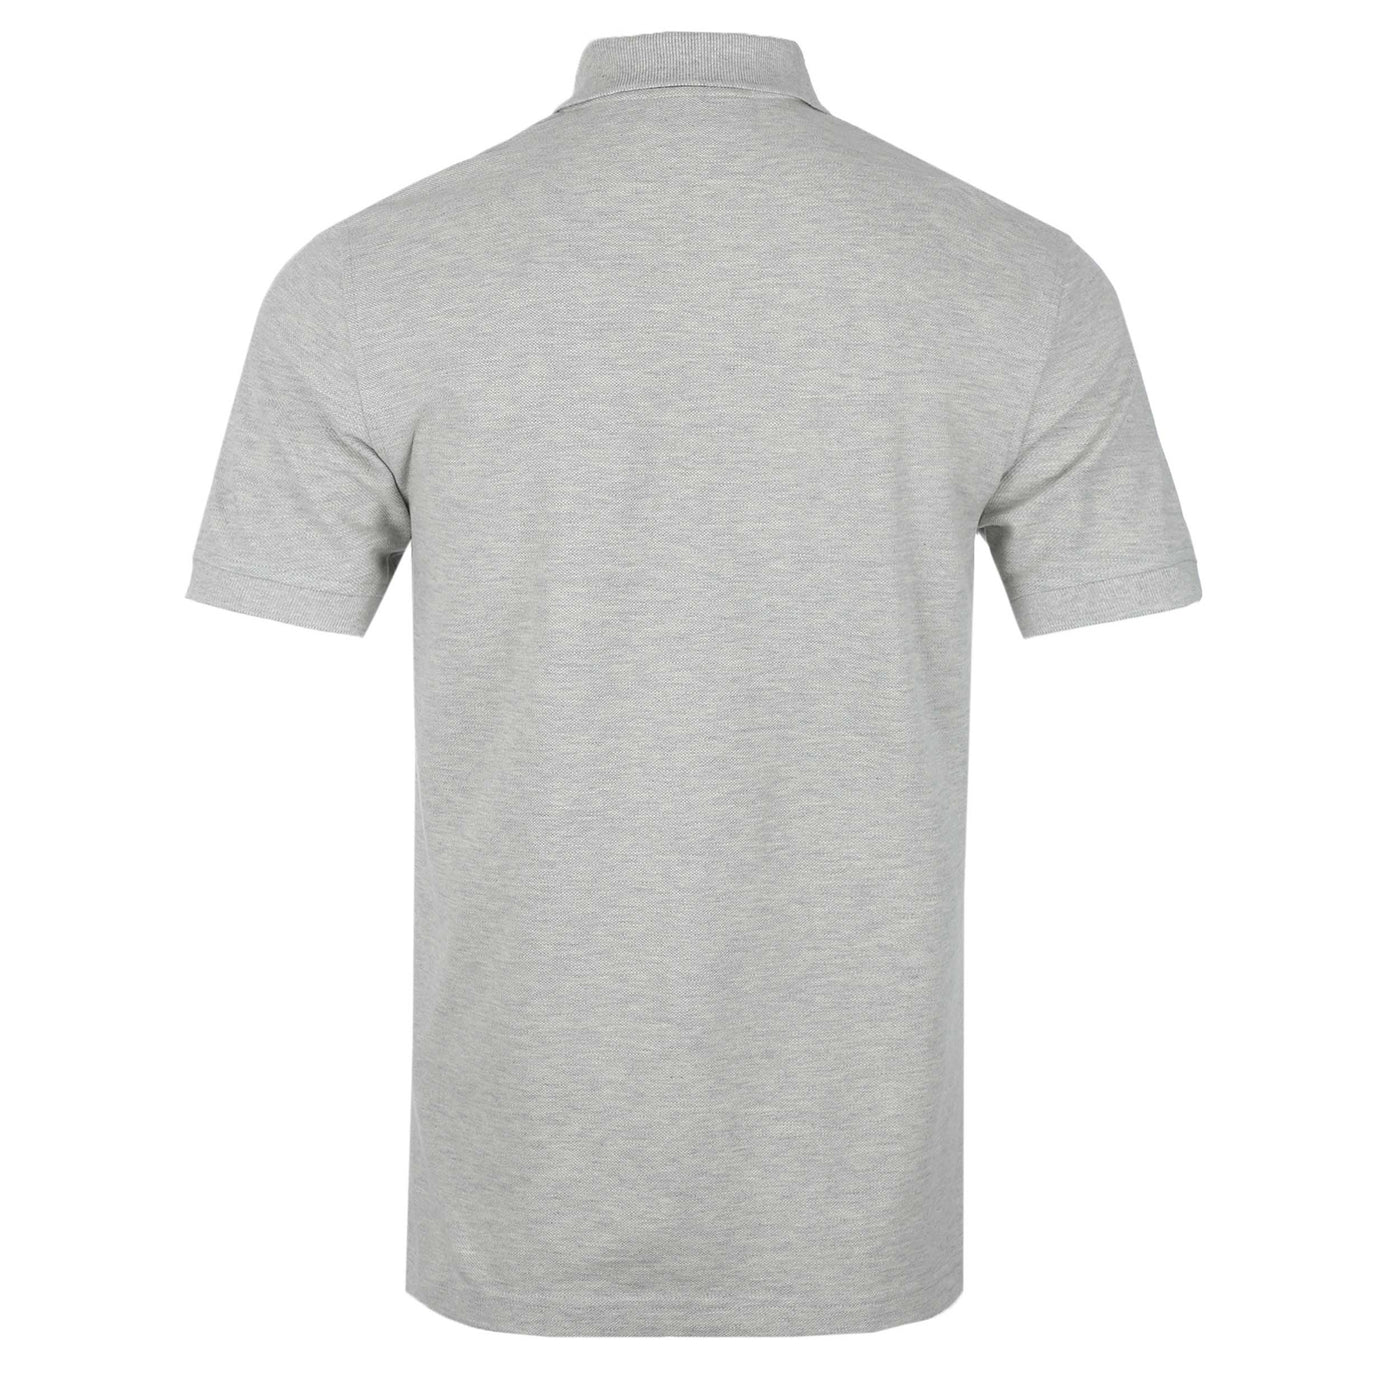 Belstaff Classic Short Sleeve Polo Shirt in Old Silver Heather Back